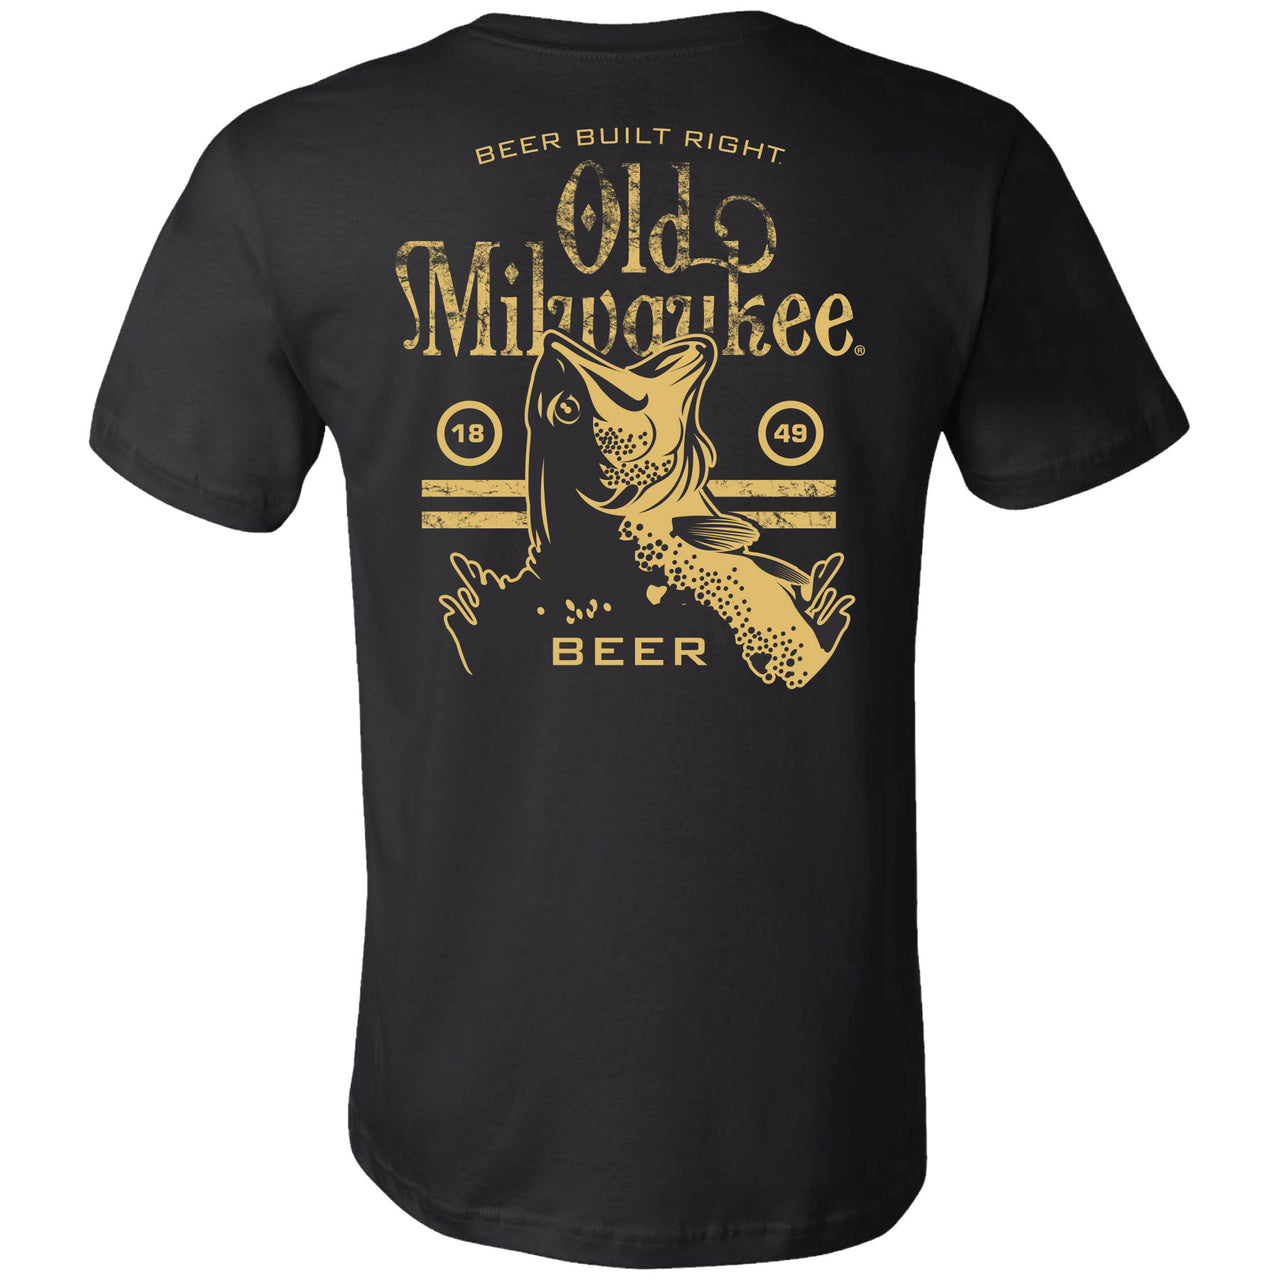 Old Milwaukee - Beer Built Right, Bass Fishing 2-sided T-shirt